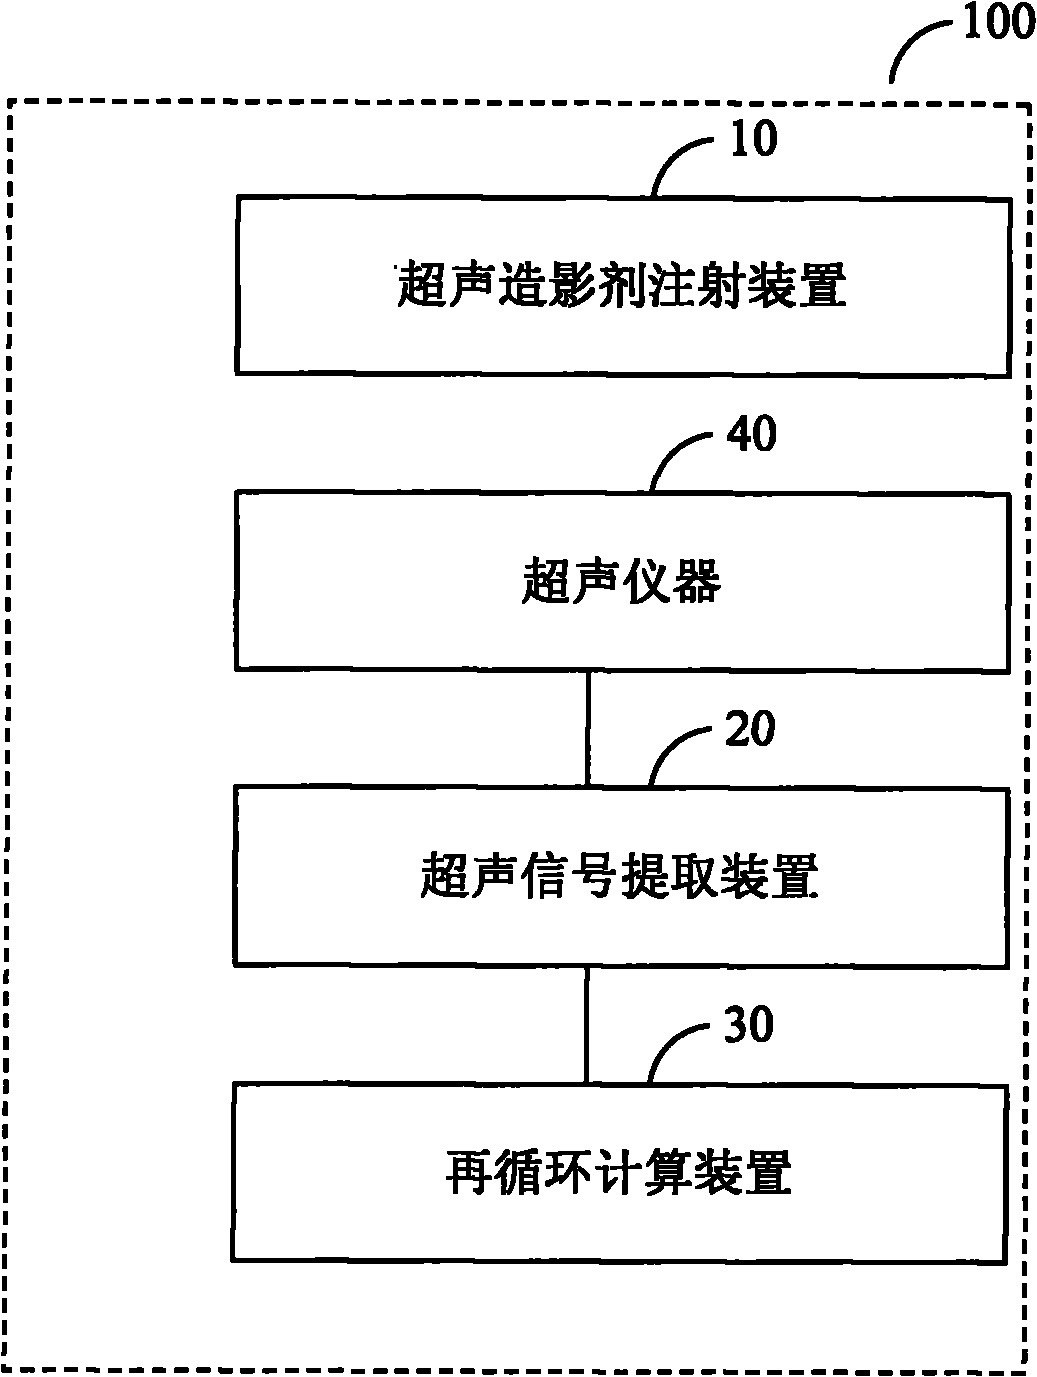 Method and system for measuring recirculation rate and/or recirculation volume of dialyzing access